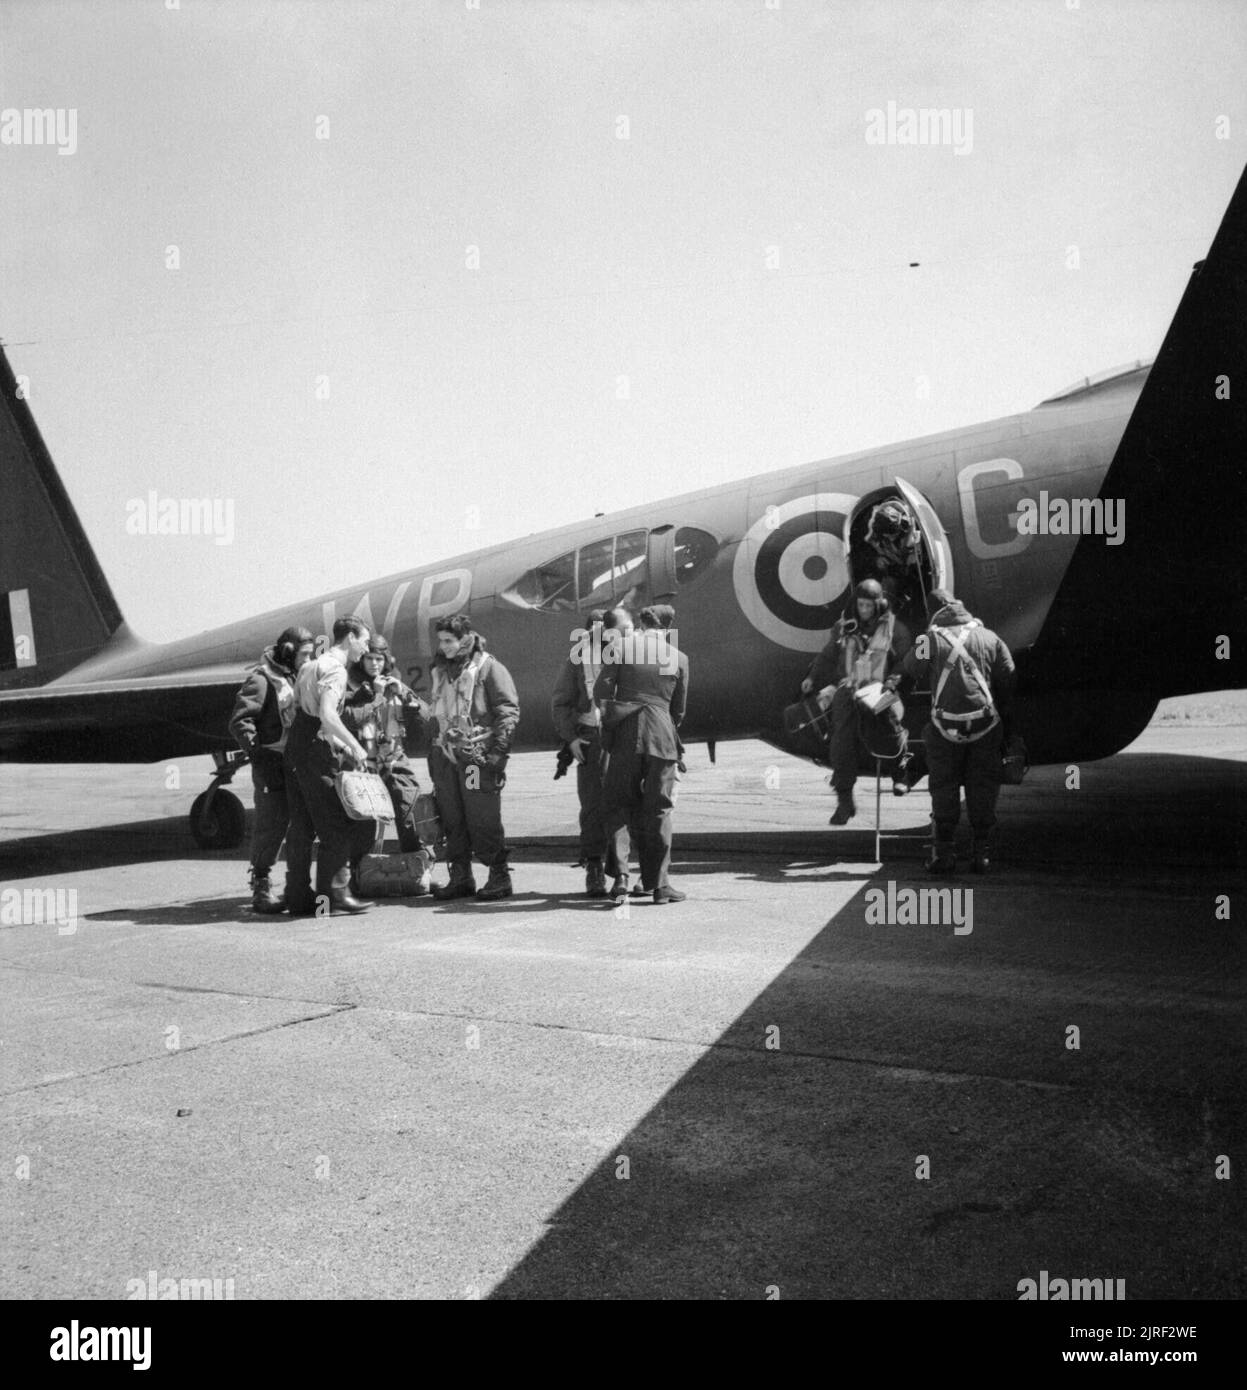 Royal Air Force Bomber Command, 1939-1941. The crew of Boeing Fortress Mark I, 'WP-G' of No. 90 Squadron RAF, climb out of their aircraft at Polebrook, Northamptonshire, after a daylight attack on the German battlecruiser GNEISENAU docked at Brest, France, which they bombed from 30,000 feet. The crews of the three Fortresses involved found that the Sperry Model 'O' bombsight, with which the Fortresses were equipped, was too inaccurate at that height, and that the Wright Cyclone engines had difficulty in maintaining such an altitude. Stock Photo